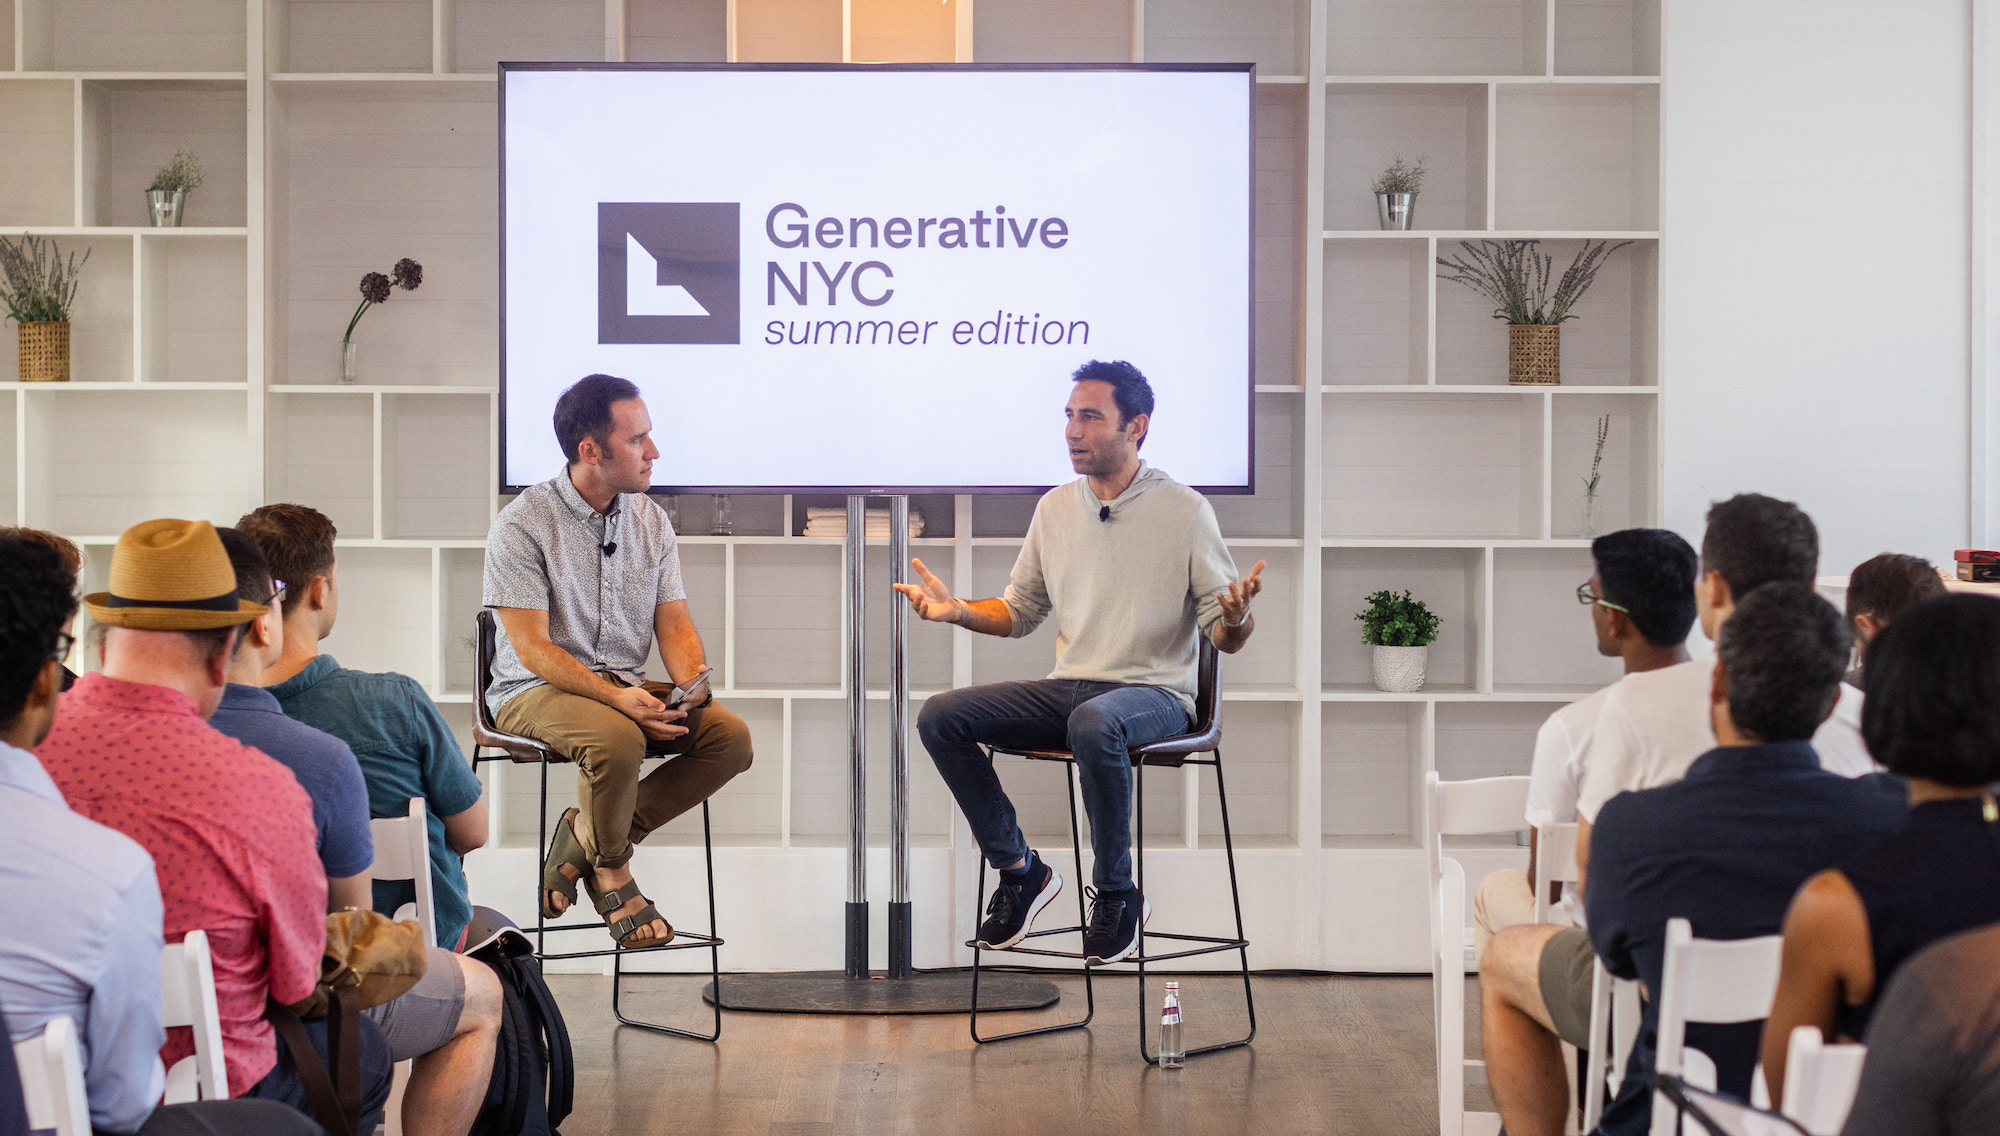 Scott Belsky and Michael Mignano at Generative NYC summer edition